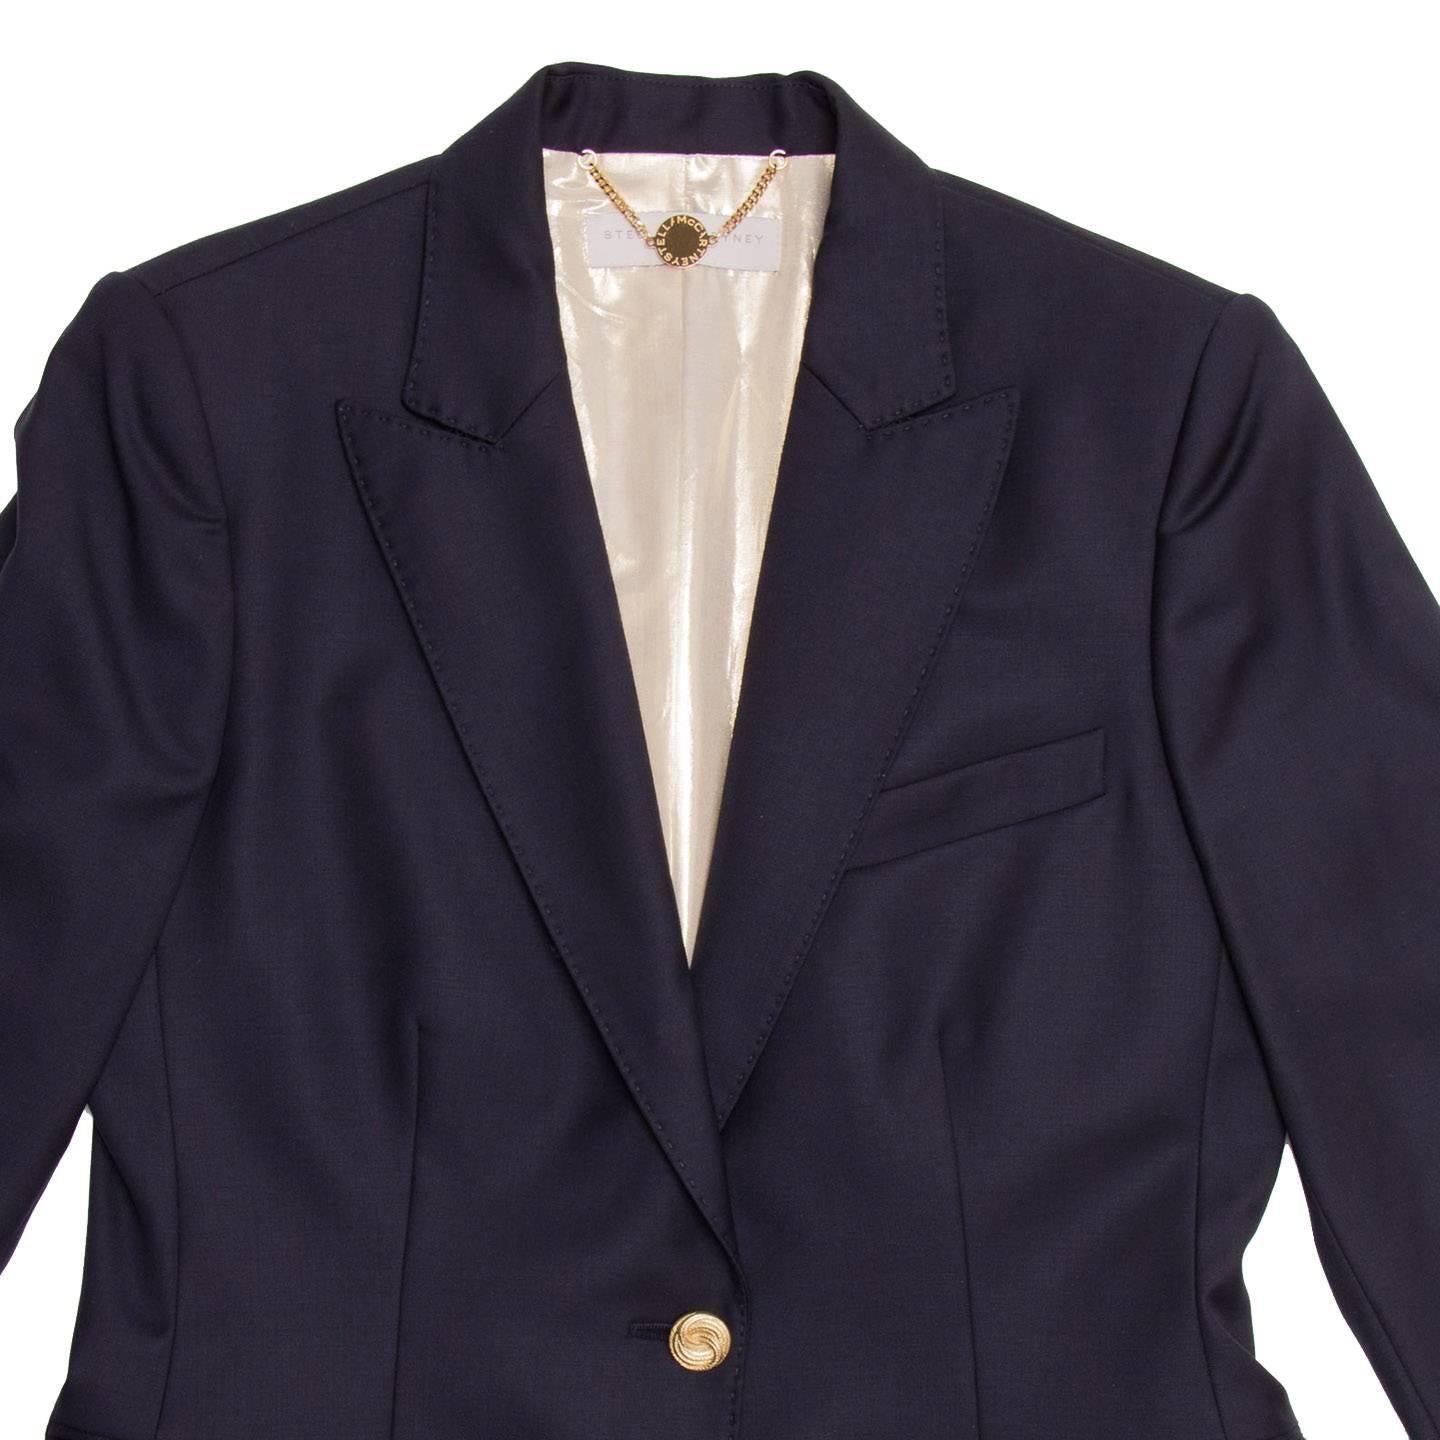 Stella McCartney Navy Wool Blazer In New Condition For Sale In Brooklyn, NY